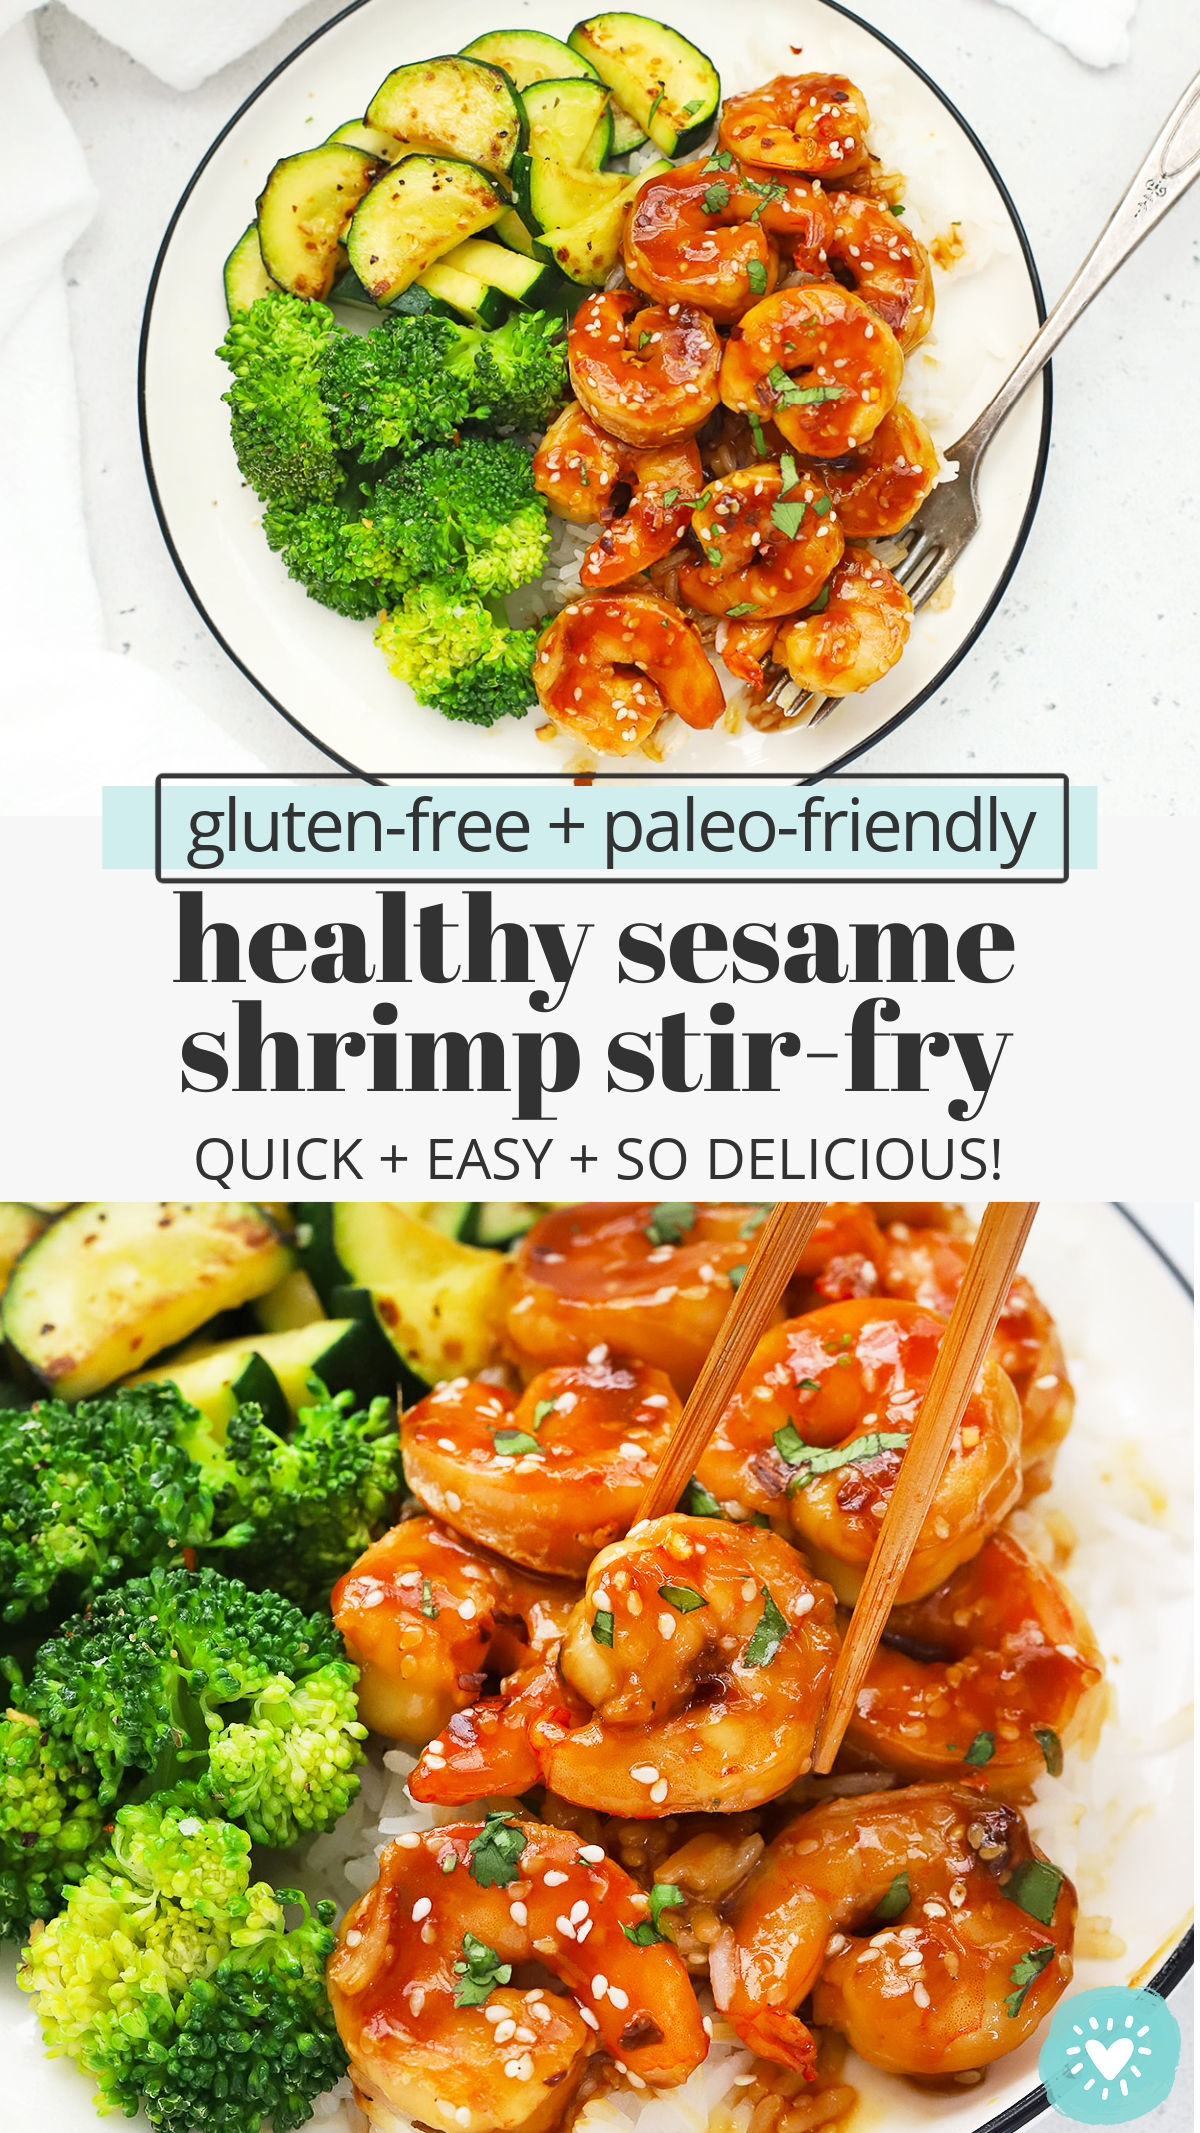 Easy Sesame Shrimp - Quick and easy healthy shrimp stir fry with a sweet, tangy sesame sauce. We LOVE this easy dinner! (Gluten-Free, Paleo-Friendly)// Healthy Sesame Shrimp Stir Fry // Paleo Shrimp Stir Fry // Gluten-Free Shrimp Stir Fry // Honey Sesame Shrimp // Sesame Garlic Shrimp #shrimp #stirfry #glutenfree #paleo